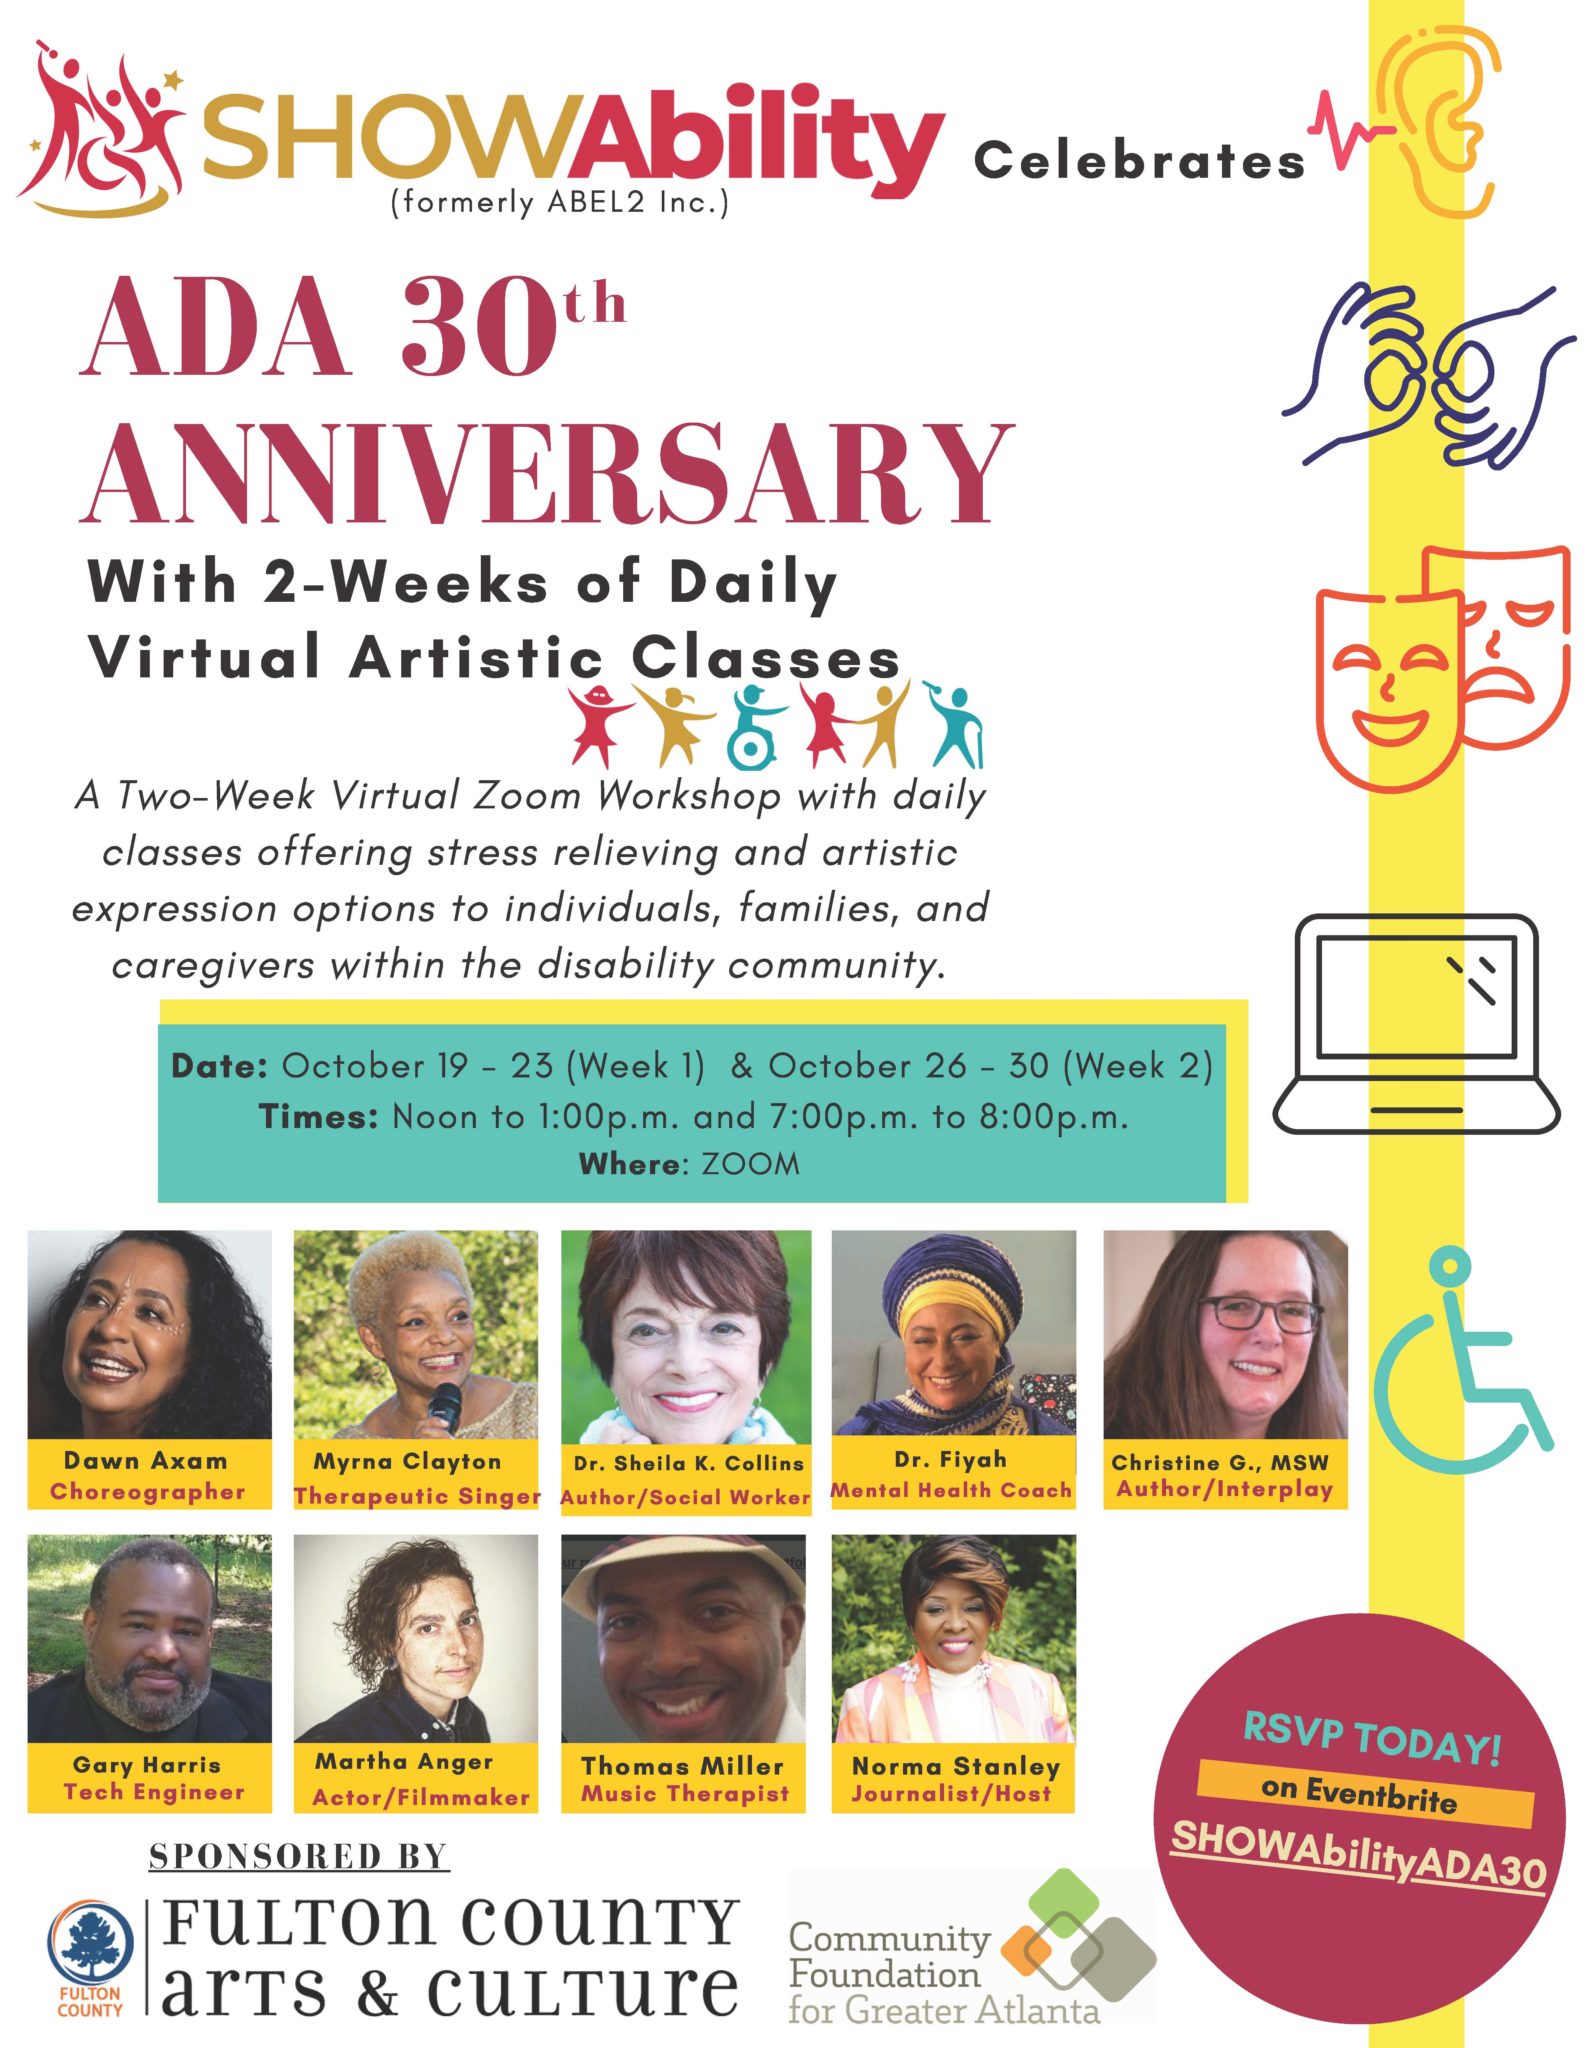 SHOWAbility celebrates ADA 30th Anniversary with 2-Weeks of Daily Virtual Artistic Classes via Zoom.